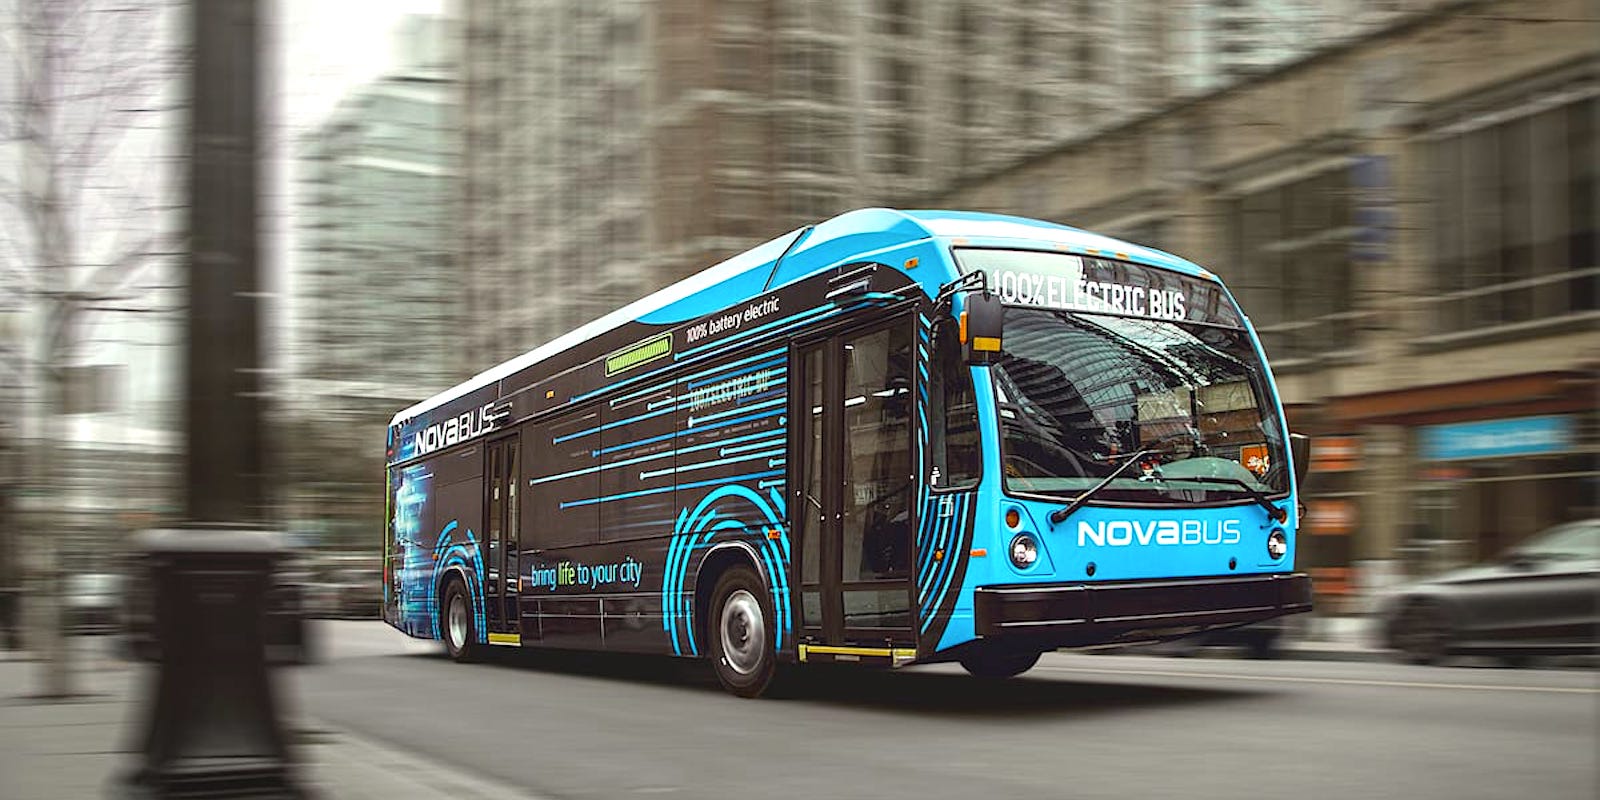 Regina’s deal, as well as a smaller order from the transit authority for Waterloo, Ont., are the latest in a string of Nova Bus sales to Canadian cities